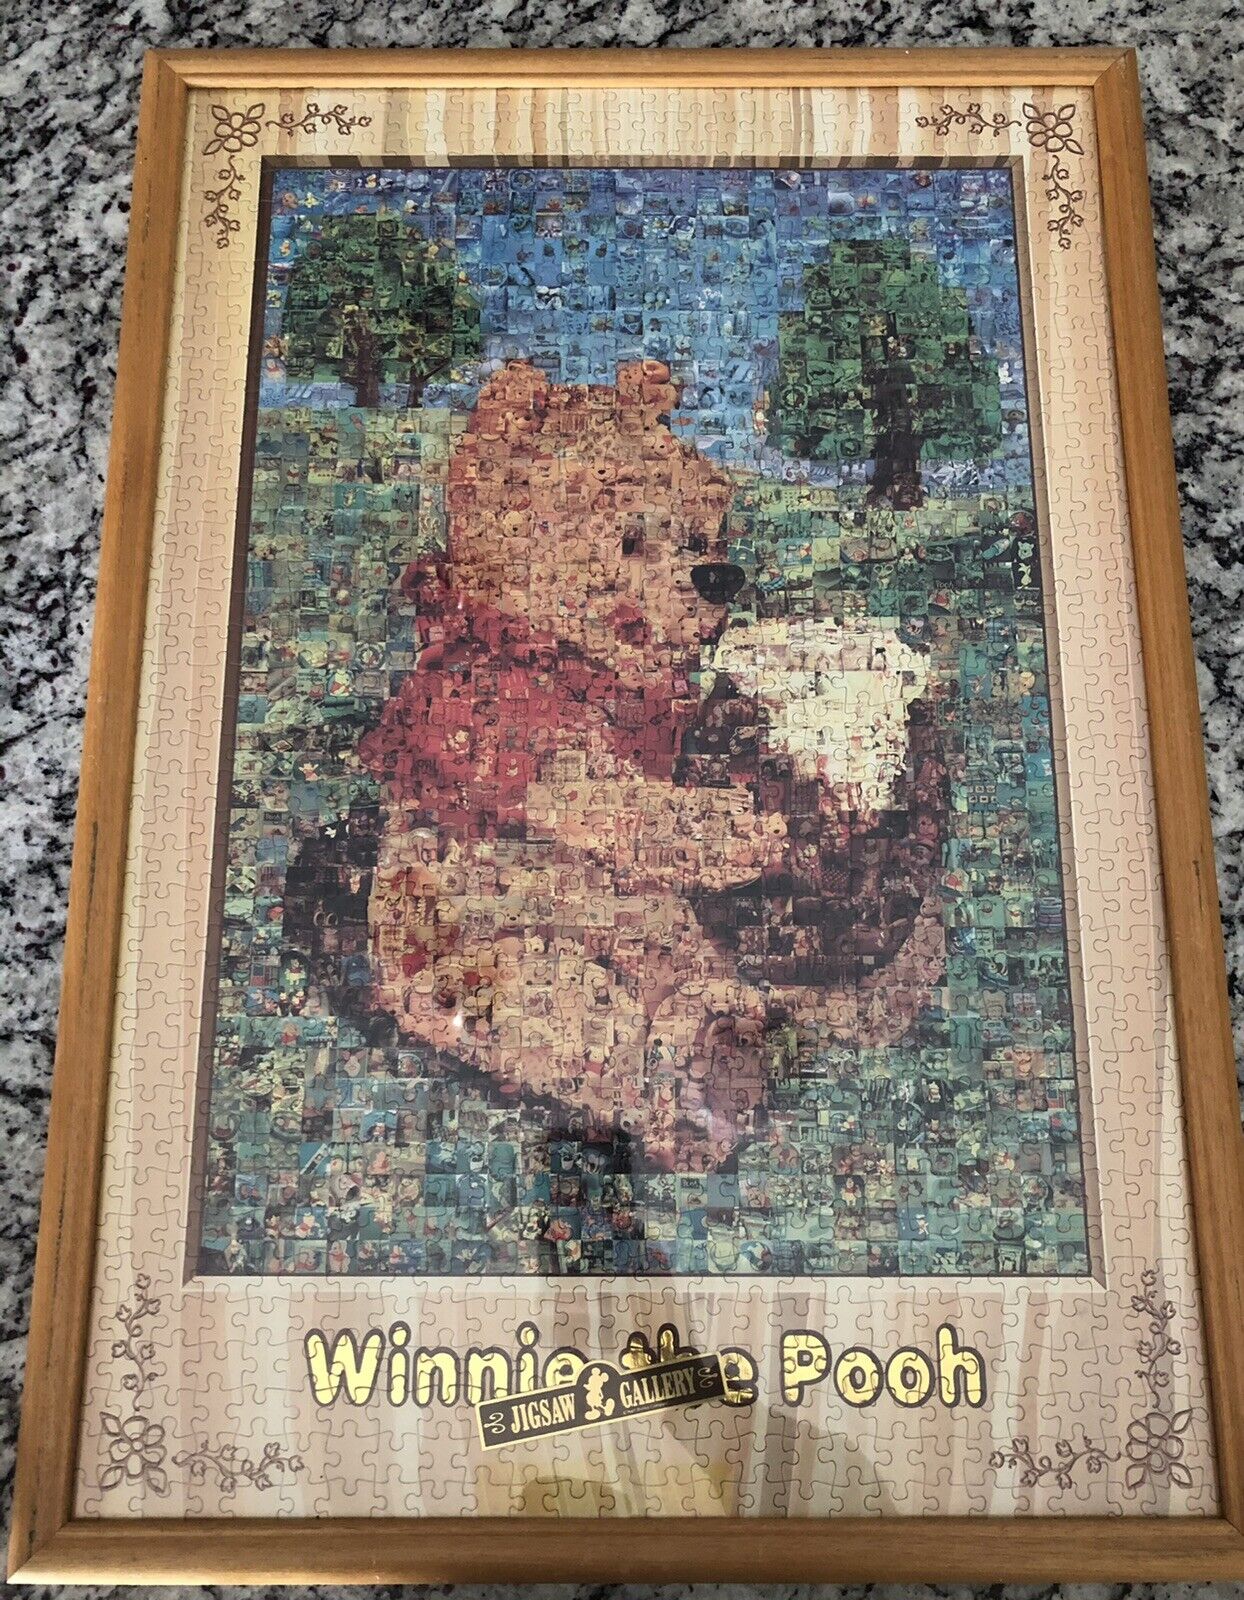 RARE Disney Tenyo Framed Winnie The Pooh Collage Jigsaw Gallery Puzzle 22”x 31” 